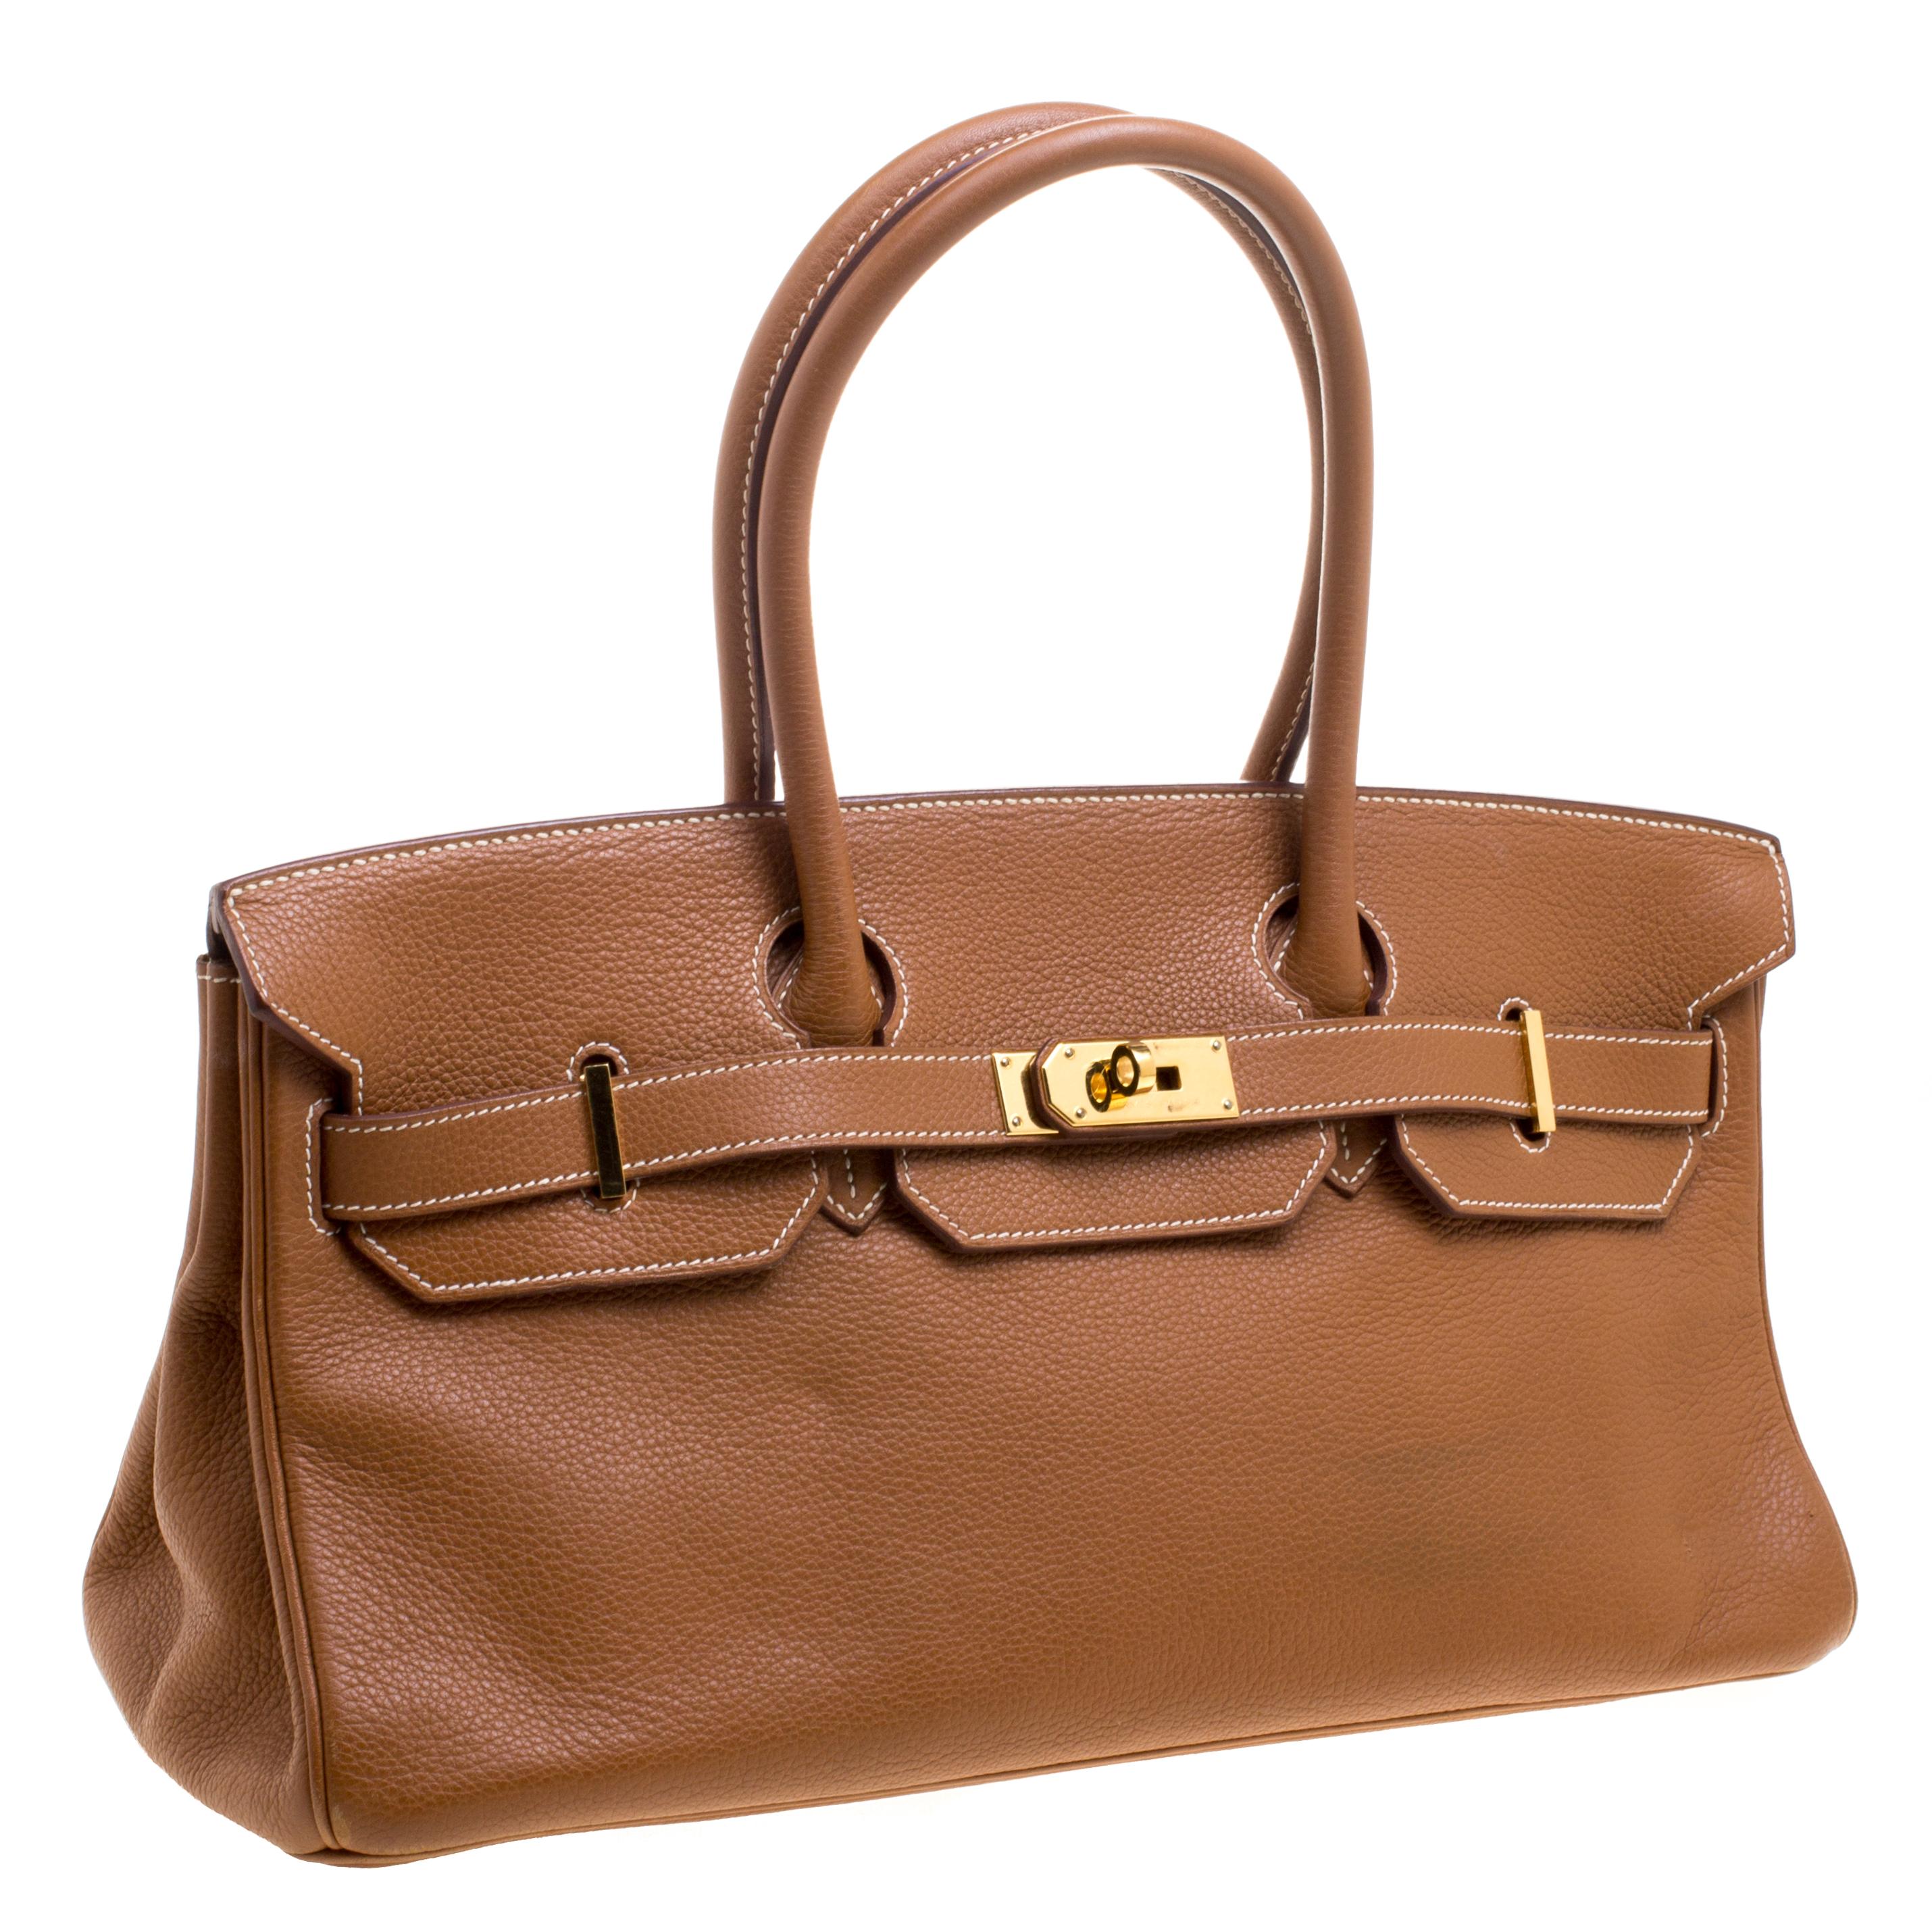 One of the most iconic bags, the Hermes Birkin 42 will make a standout addition to your collection. The Birkin is a timeless classic that never goes out of style. The bag is crafted from togo leather and has gold hardware. Slouchy in design it has